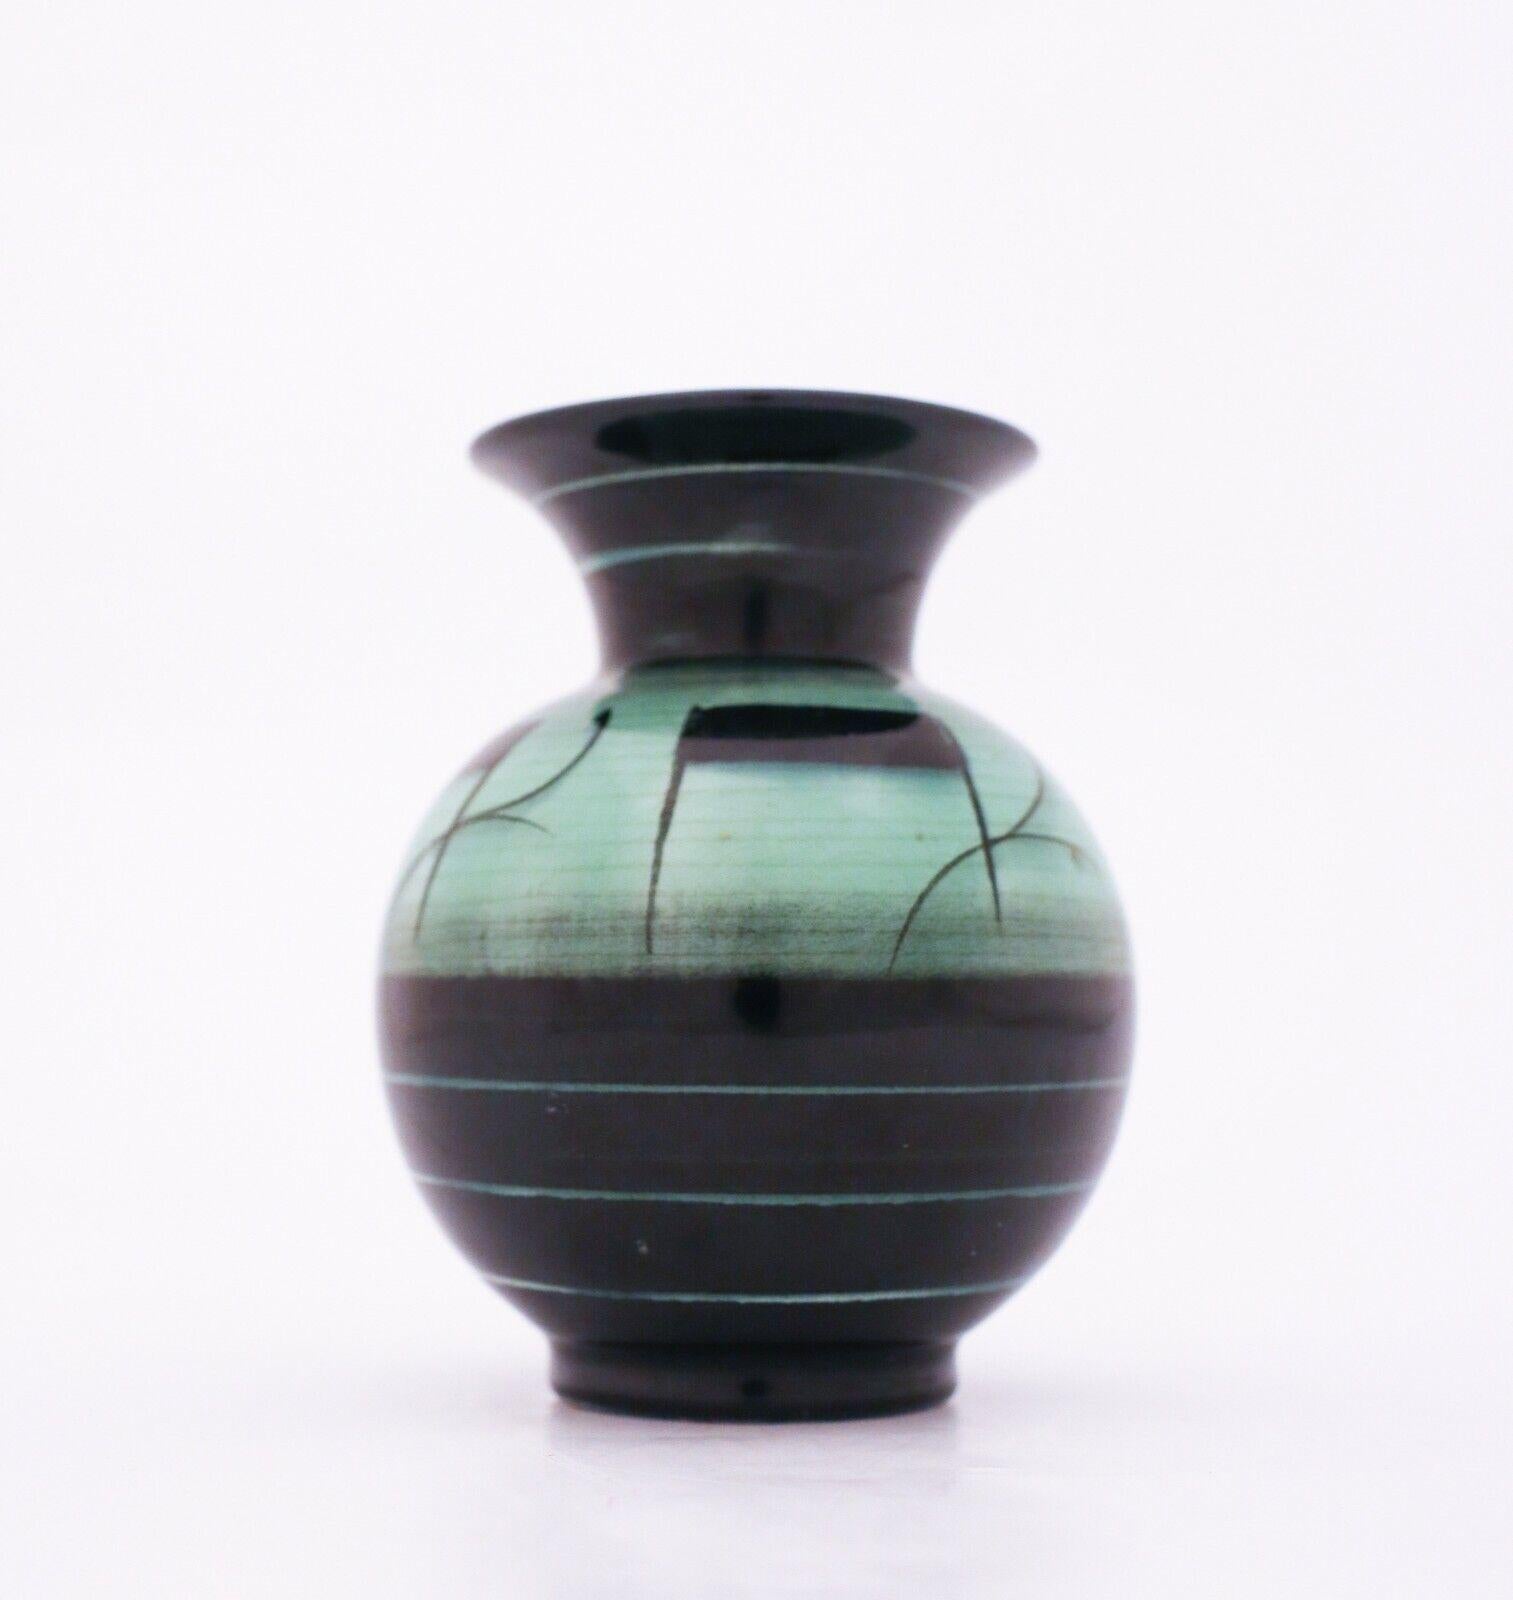 Art Deco at its best! A lovely green and black vase designed by Ilse Claesson in the 1930s at Rörstrand, Sweden. It is 11 cm high and in very good condition except from some craquelure in the glaze because of the age.